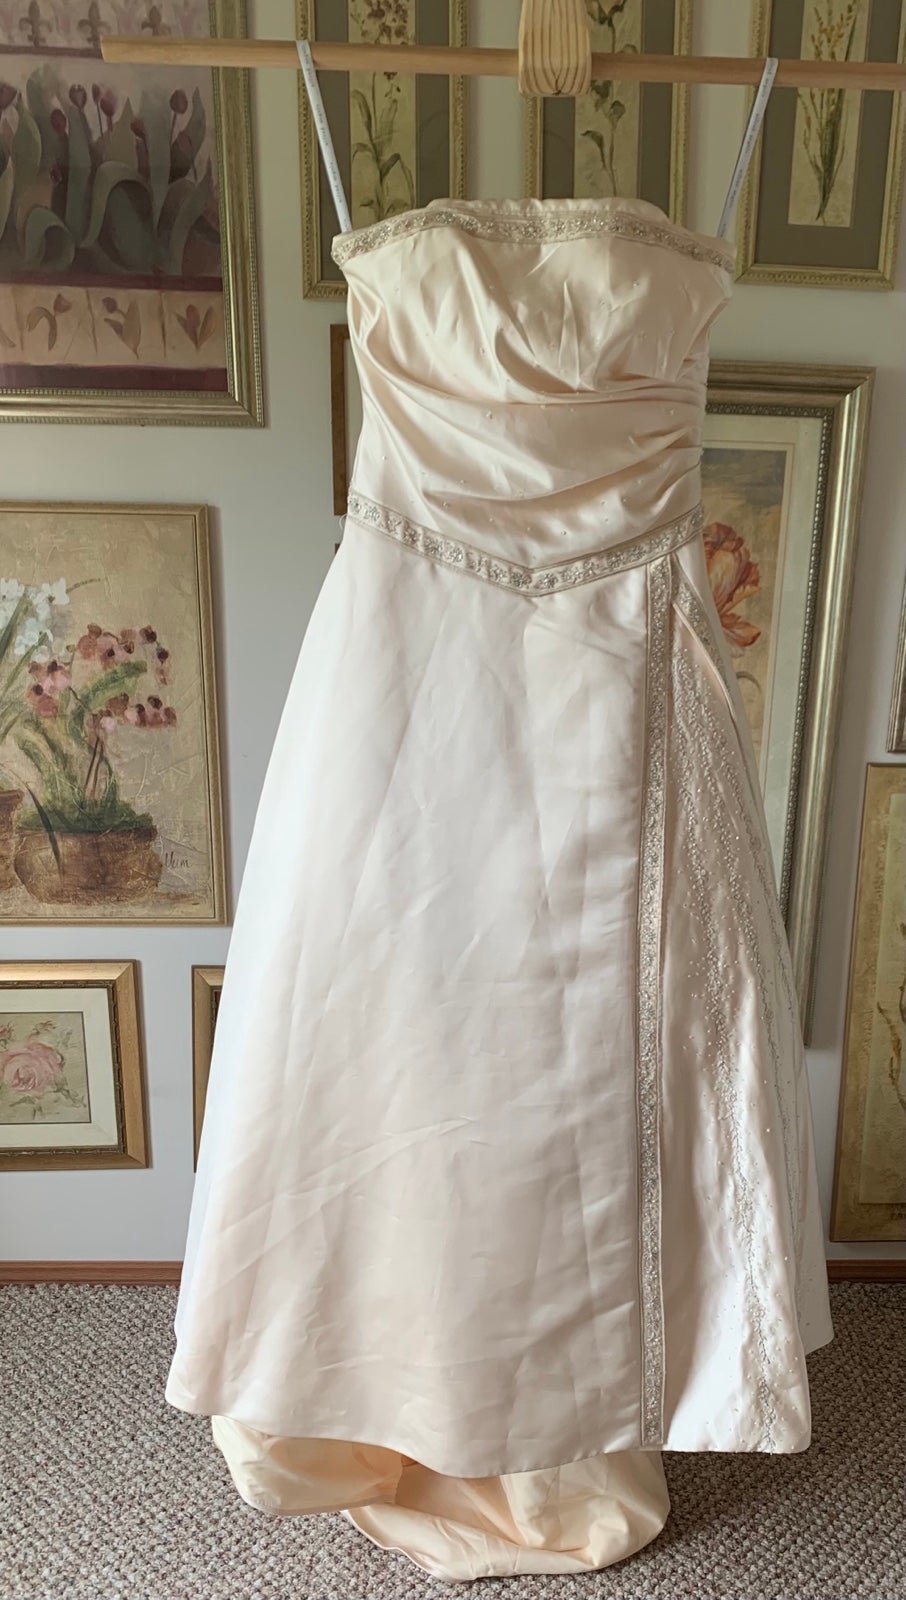 Discounted NWT gold strapless wedding dress k7p8Uf1HE online store